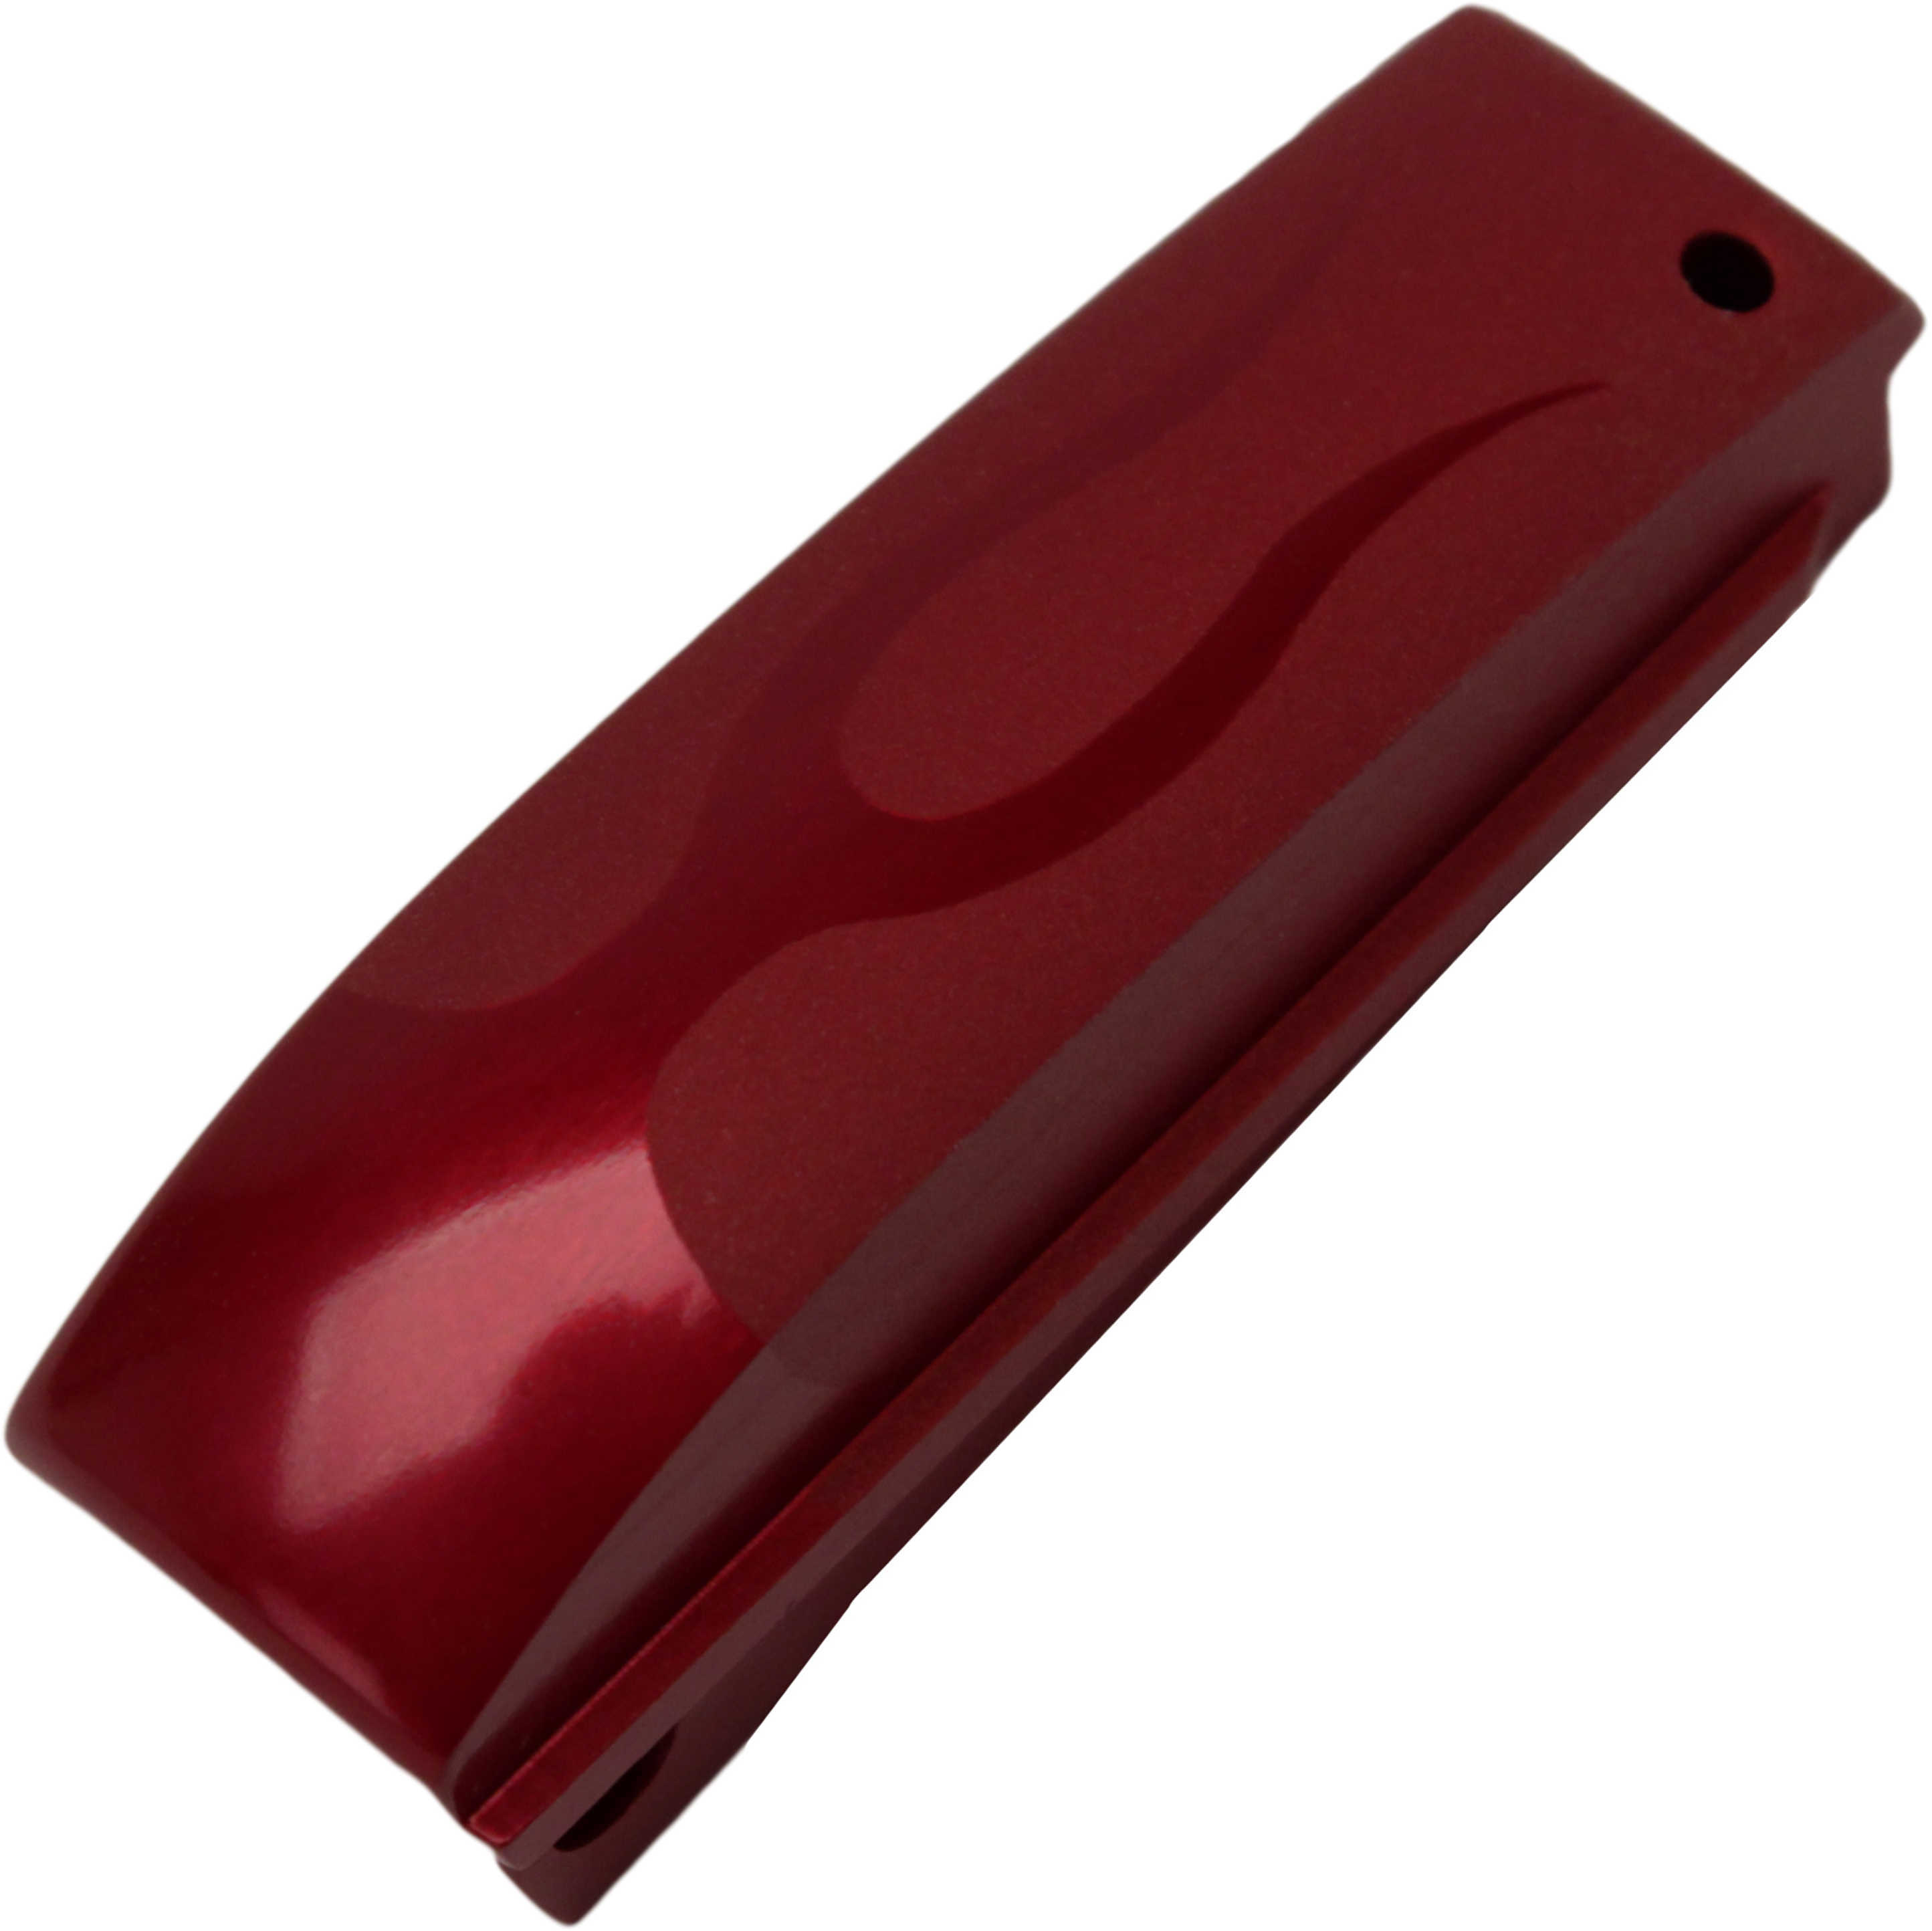 Hogue Colt, 1911 Government Mainspring Housing Aluminum, Flame Arched Red Anodized 01332